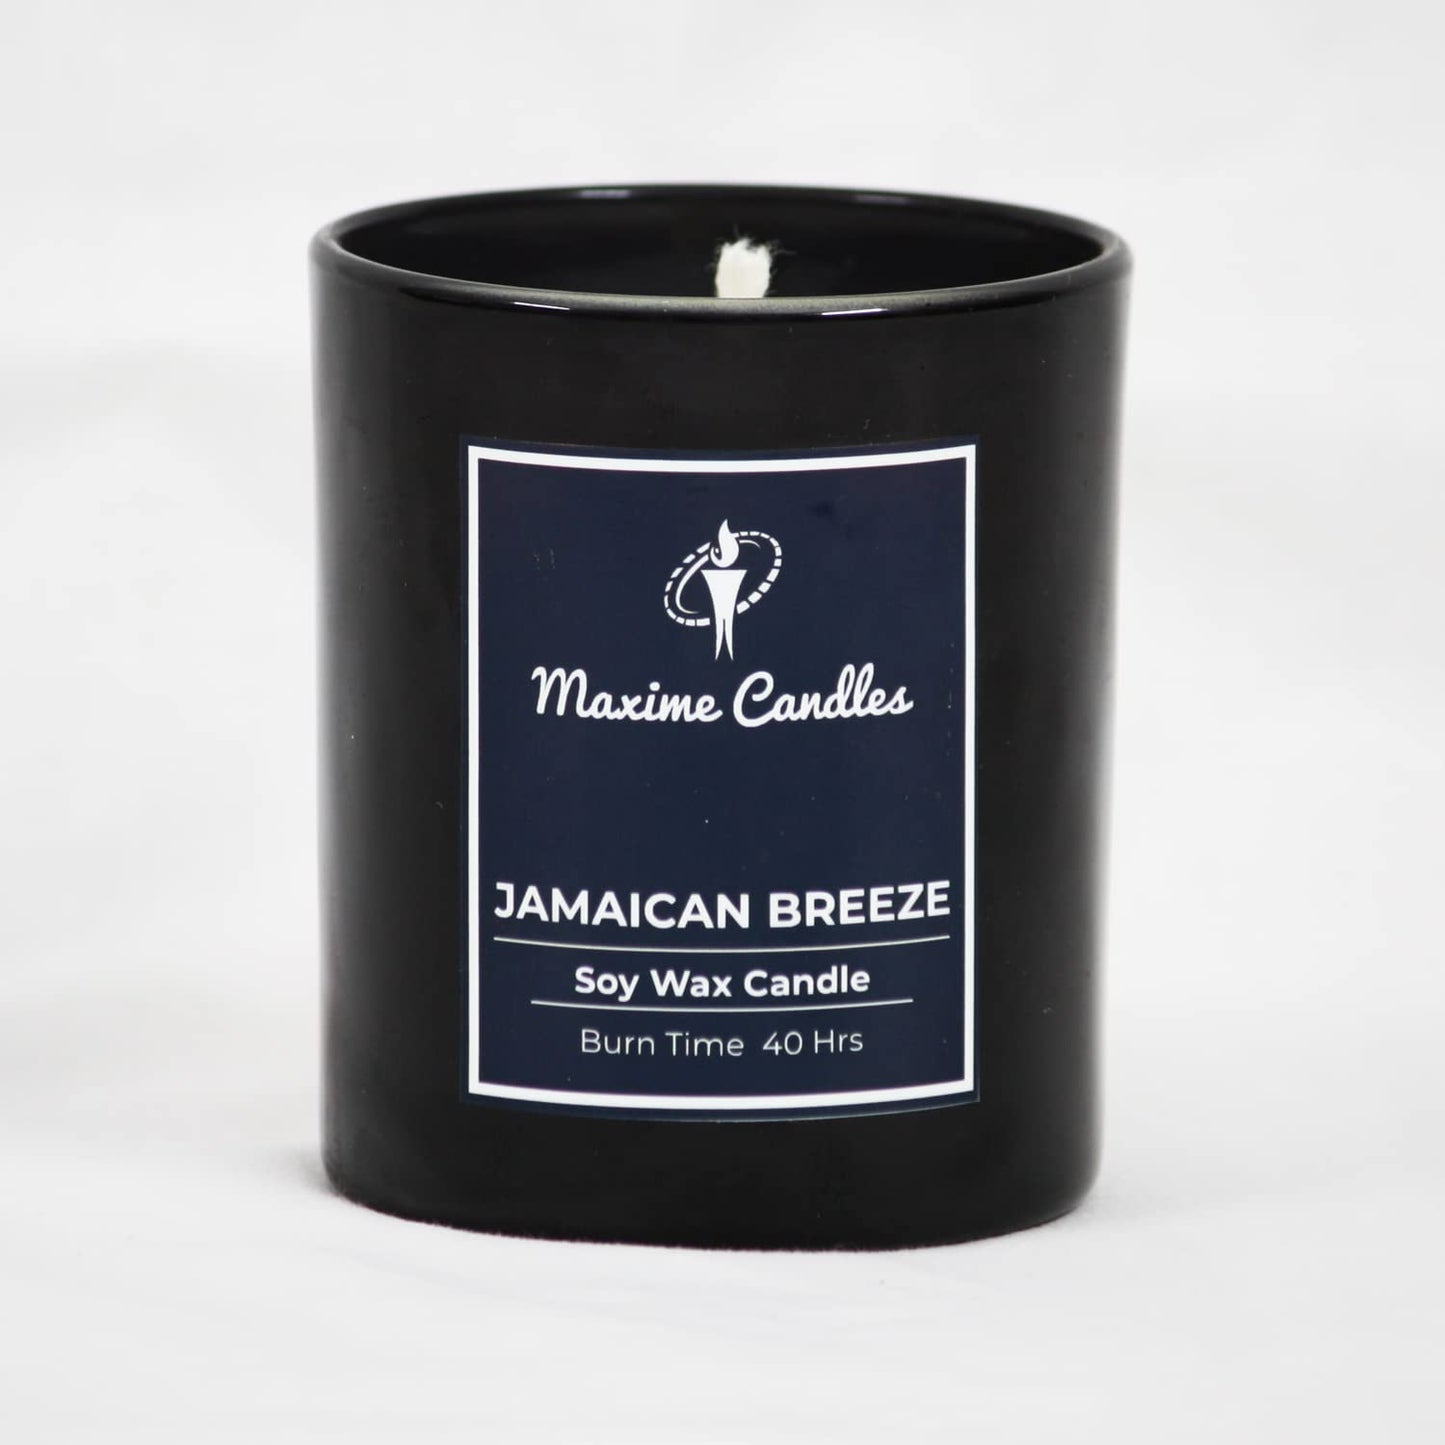 Jamaican Breeze Fragranced Soy Wax Black Glass Jar Scented Candle